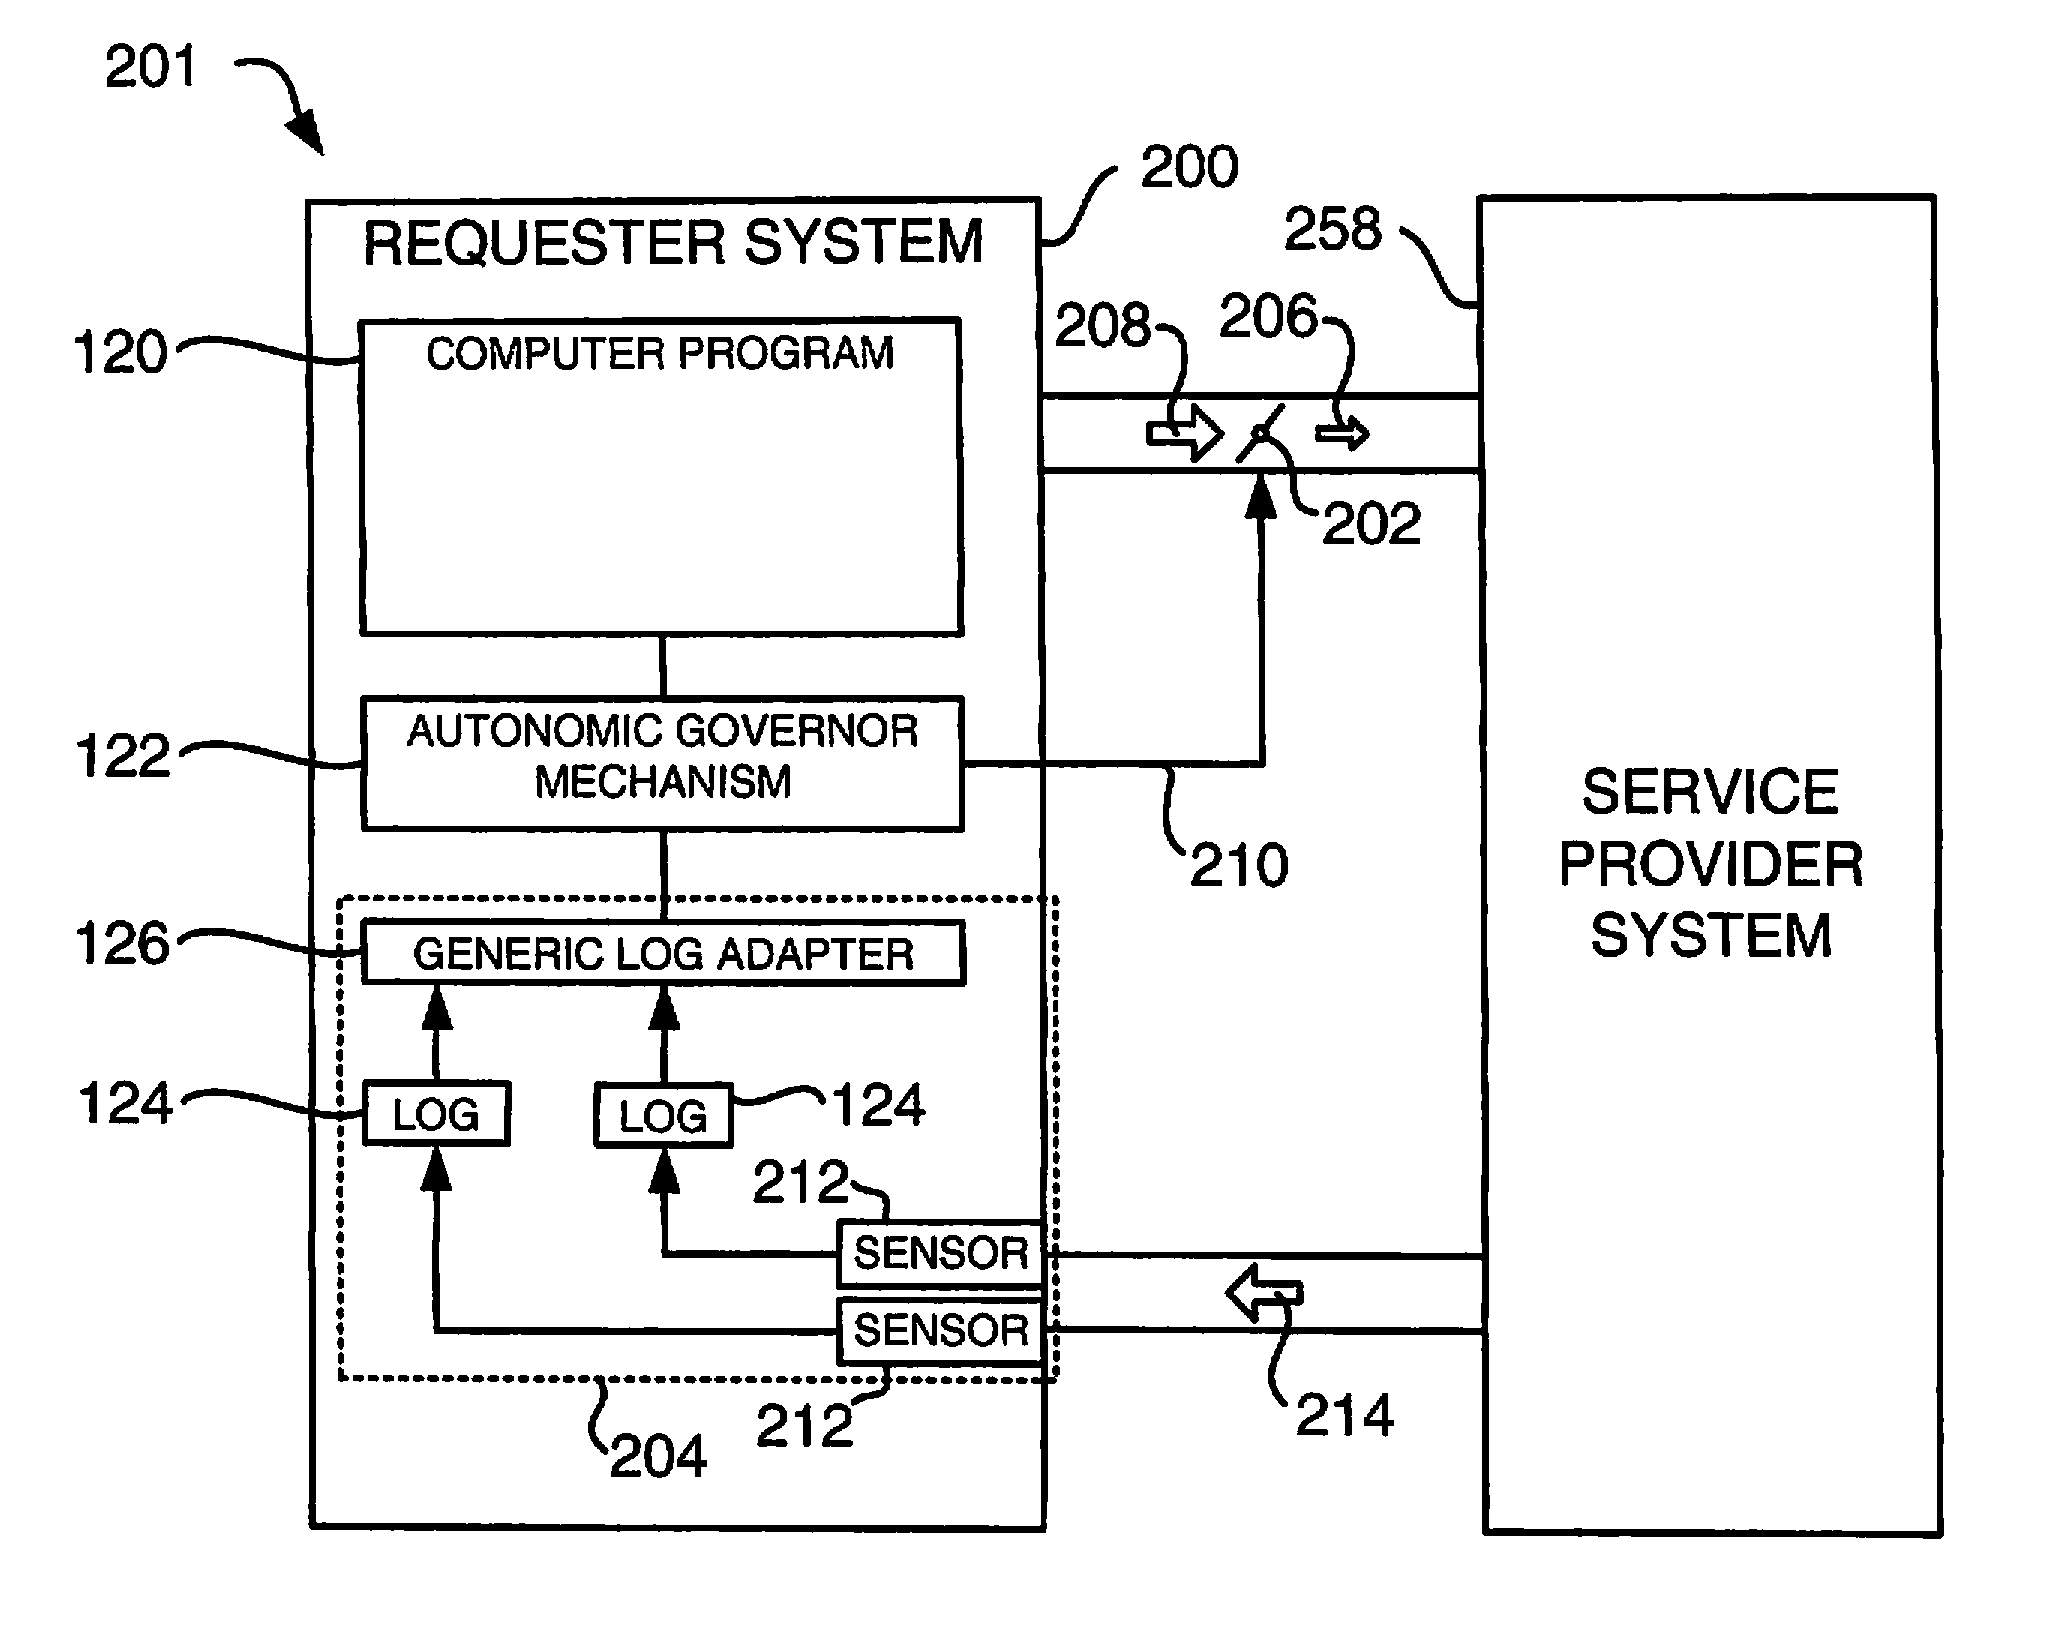 Computer-implemented method for implementing a requester-side autonomic governor using feedback loop information to dynamically adjust a resource threshold of a resource pool scheme